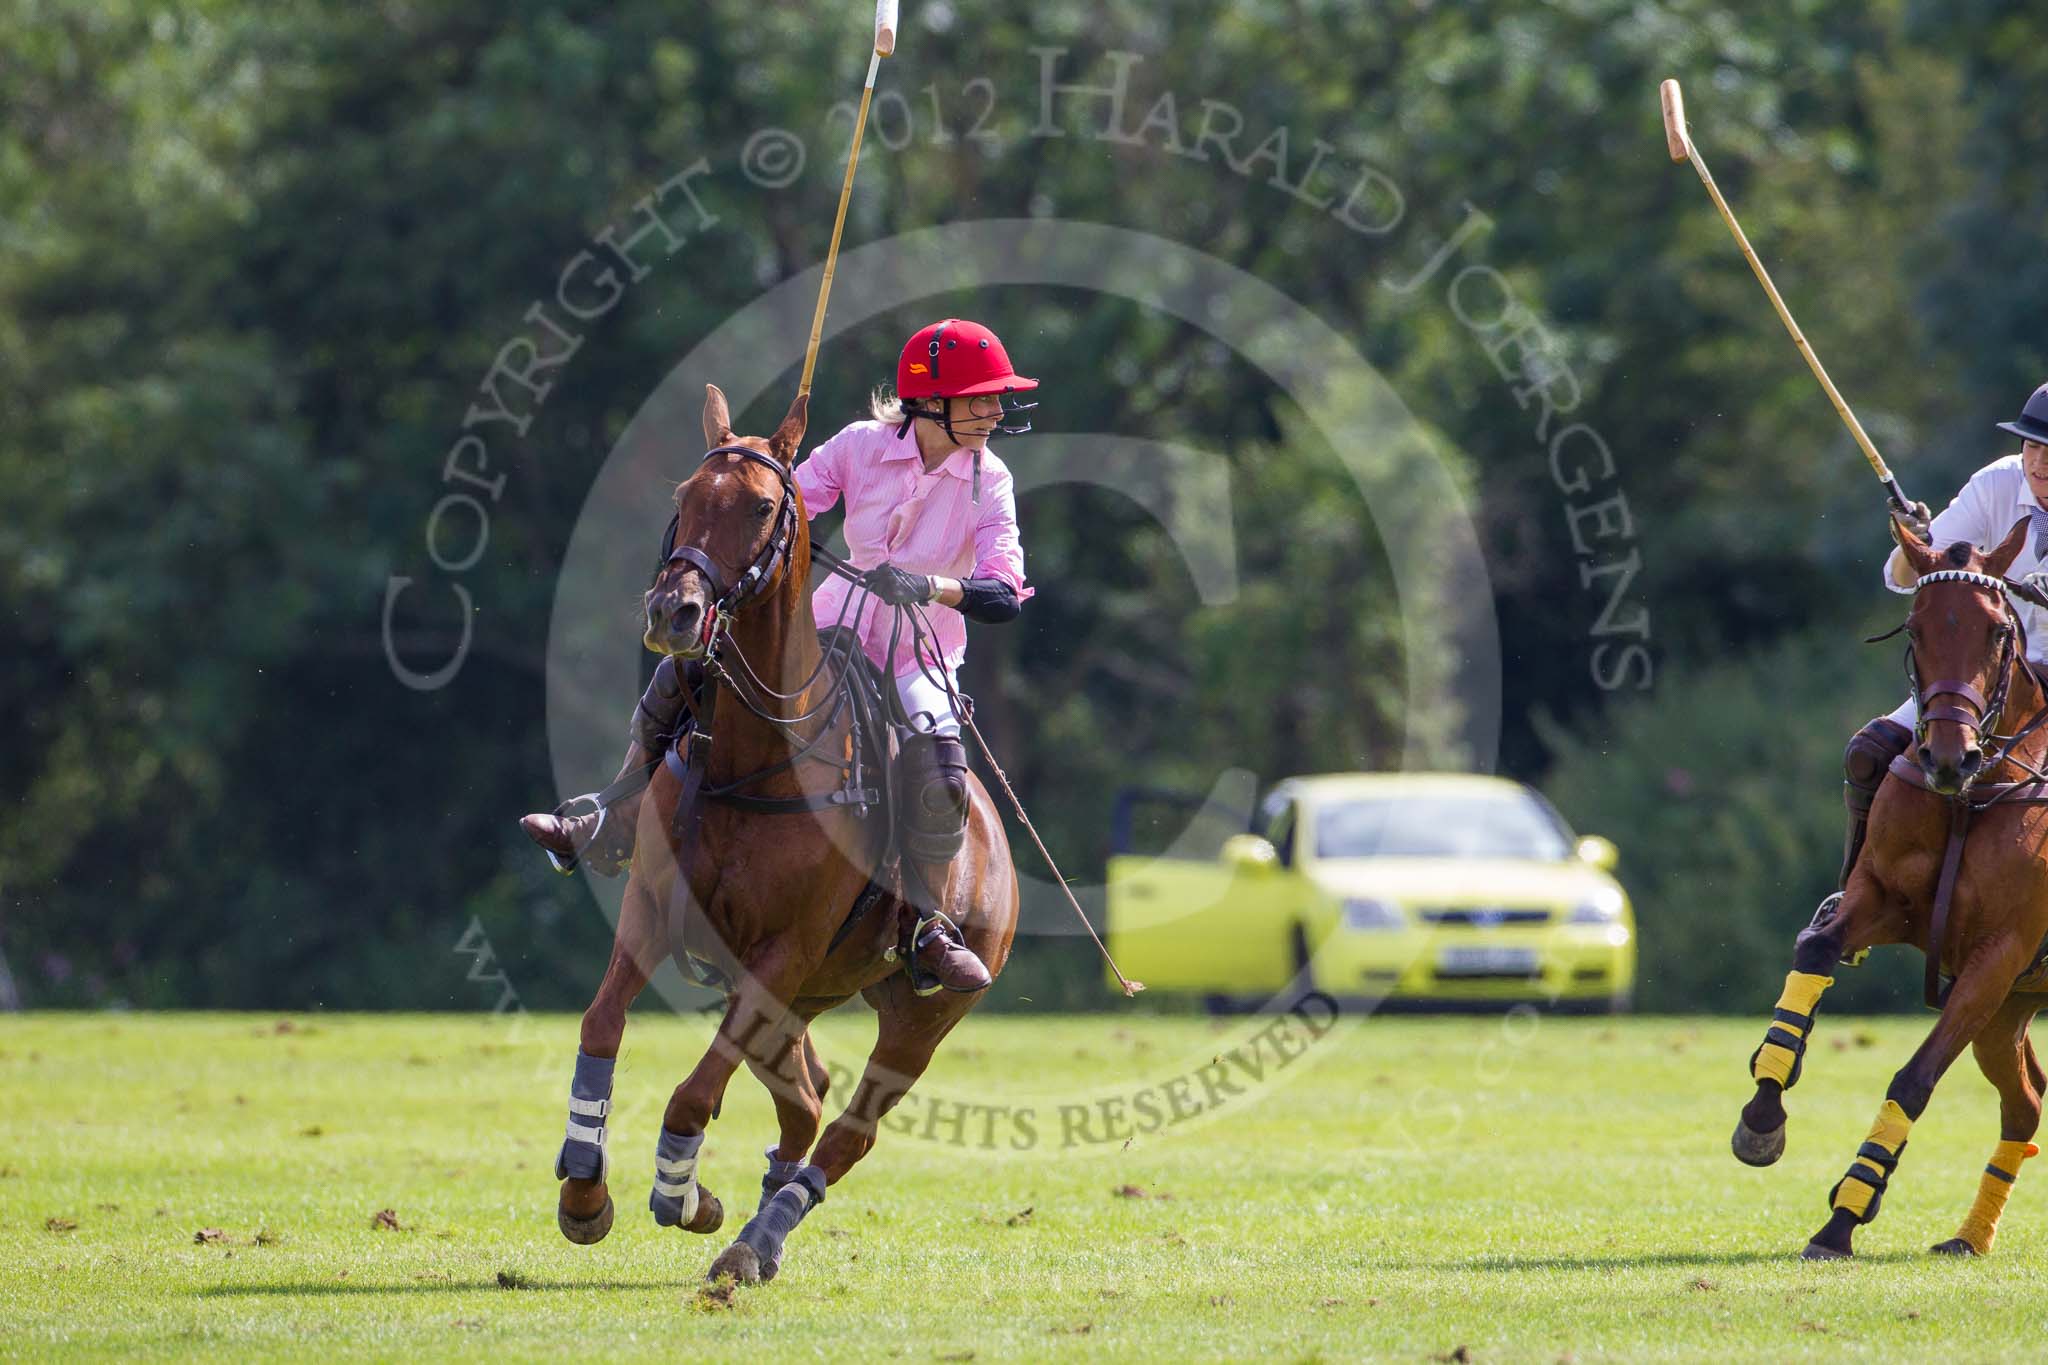 7th Heritage Polo Cup finals: Clare Payne..
Hurtwood Park Polo Club,
Ewhurst Green,
Surrey,
United Kingdom,
on 05 August 2012 at 15:21, image #156